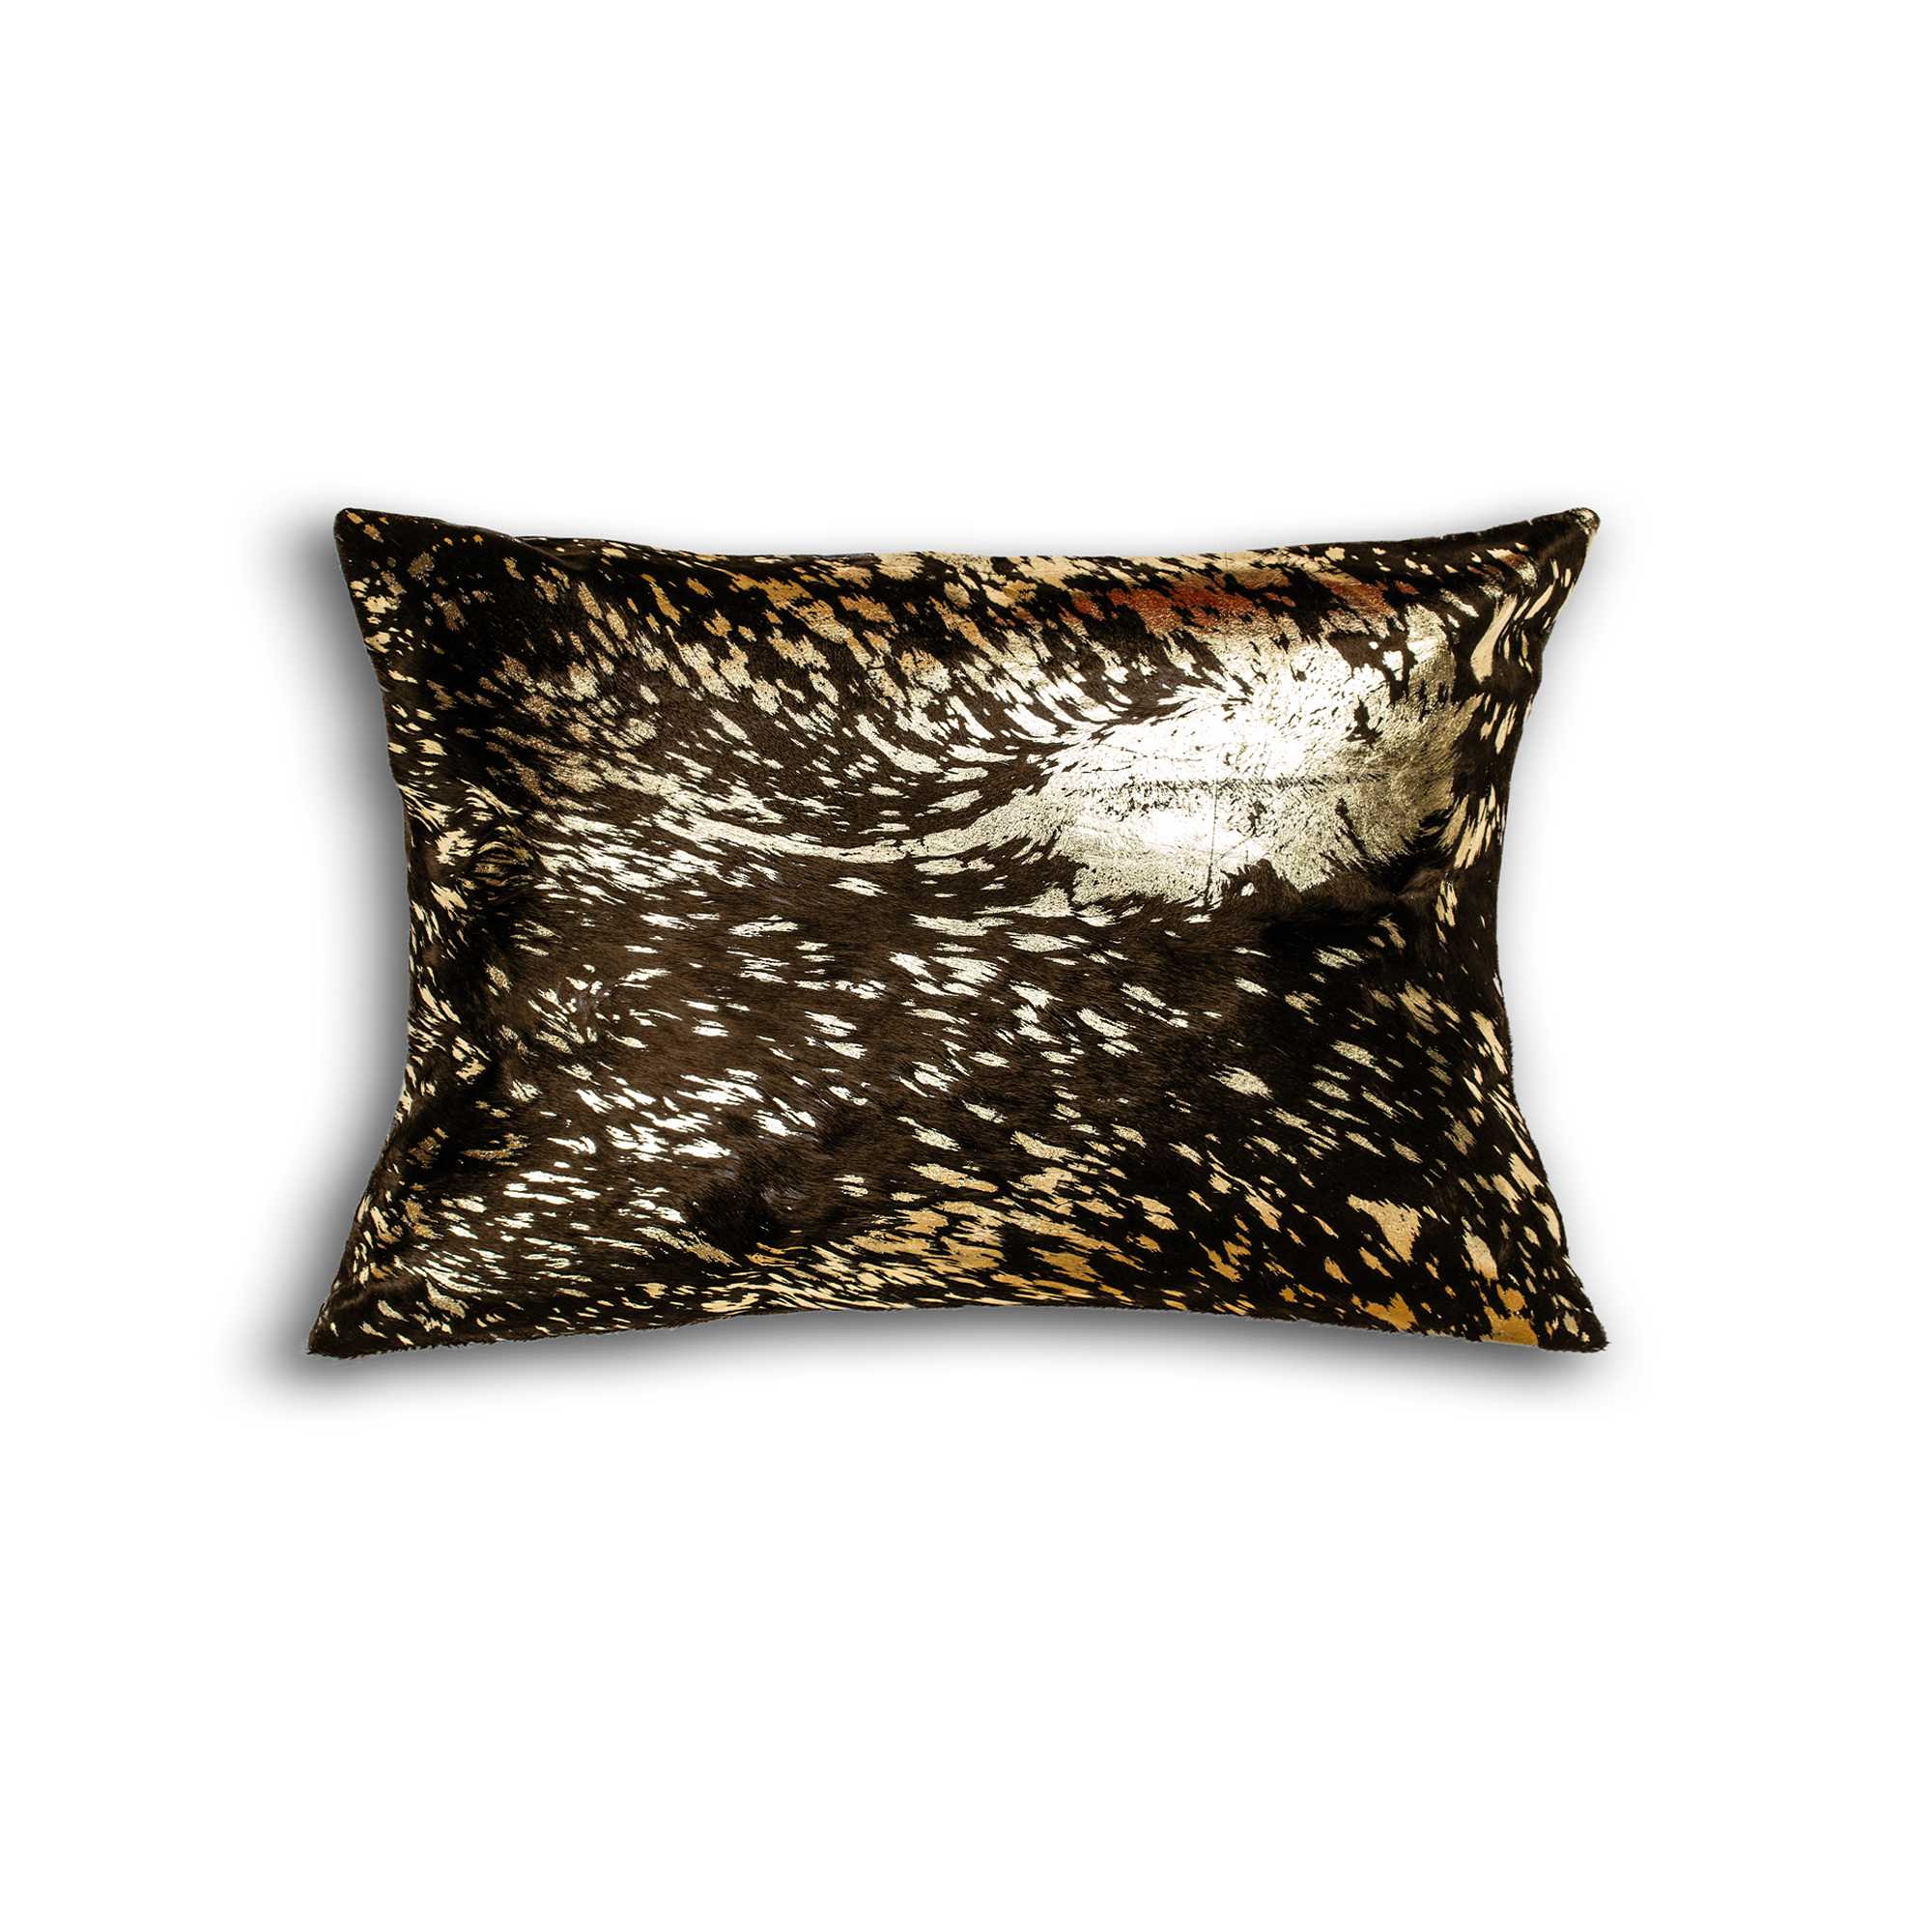 12" x 20" x 5" Chocolate And Gold Cowhide - Pillow